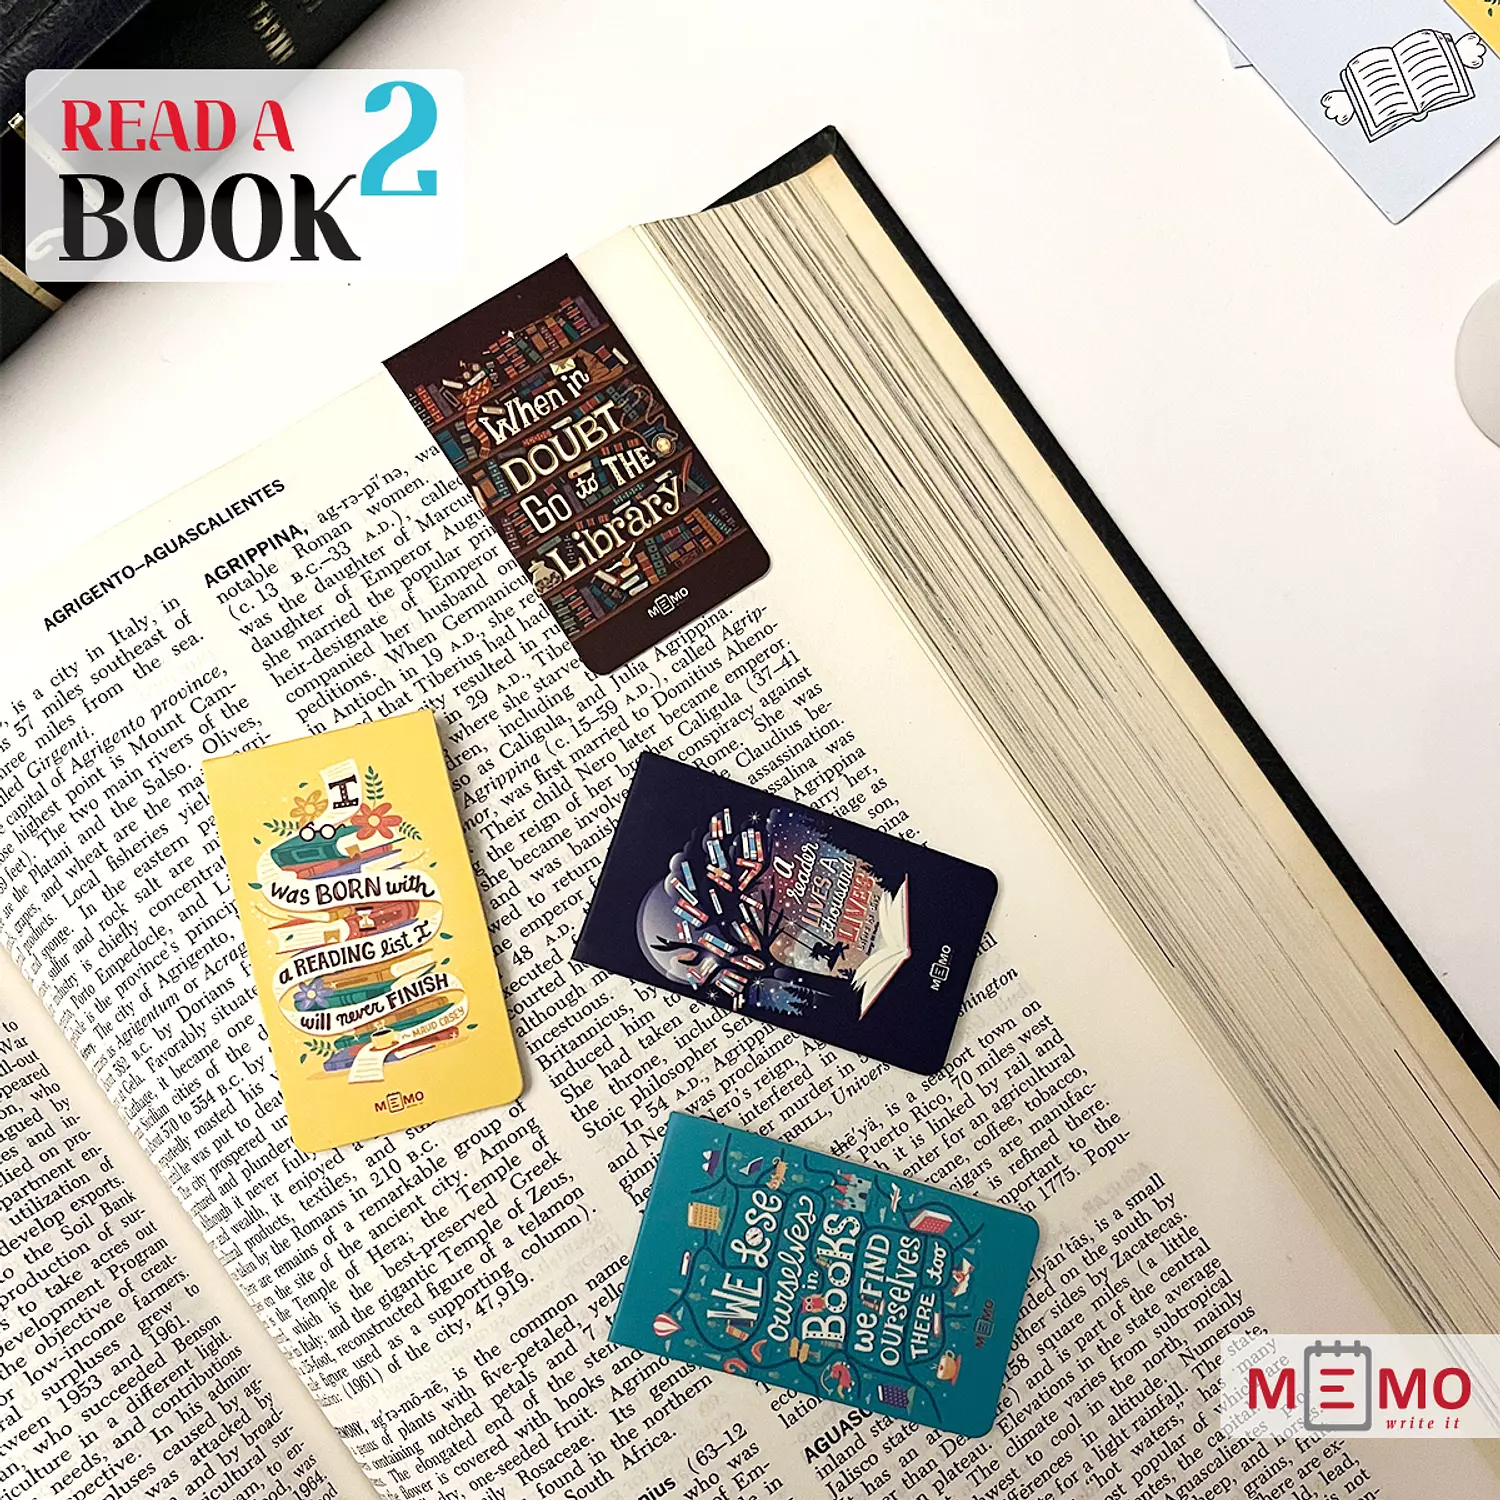 Memo Read a book 2 Magnetic Bookmarks (4 pcs) hover image